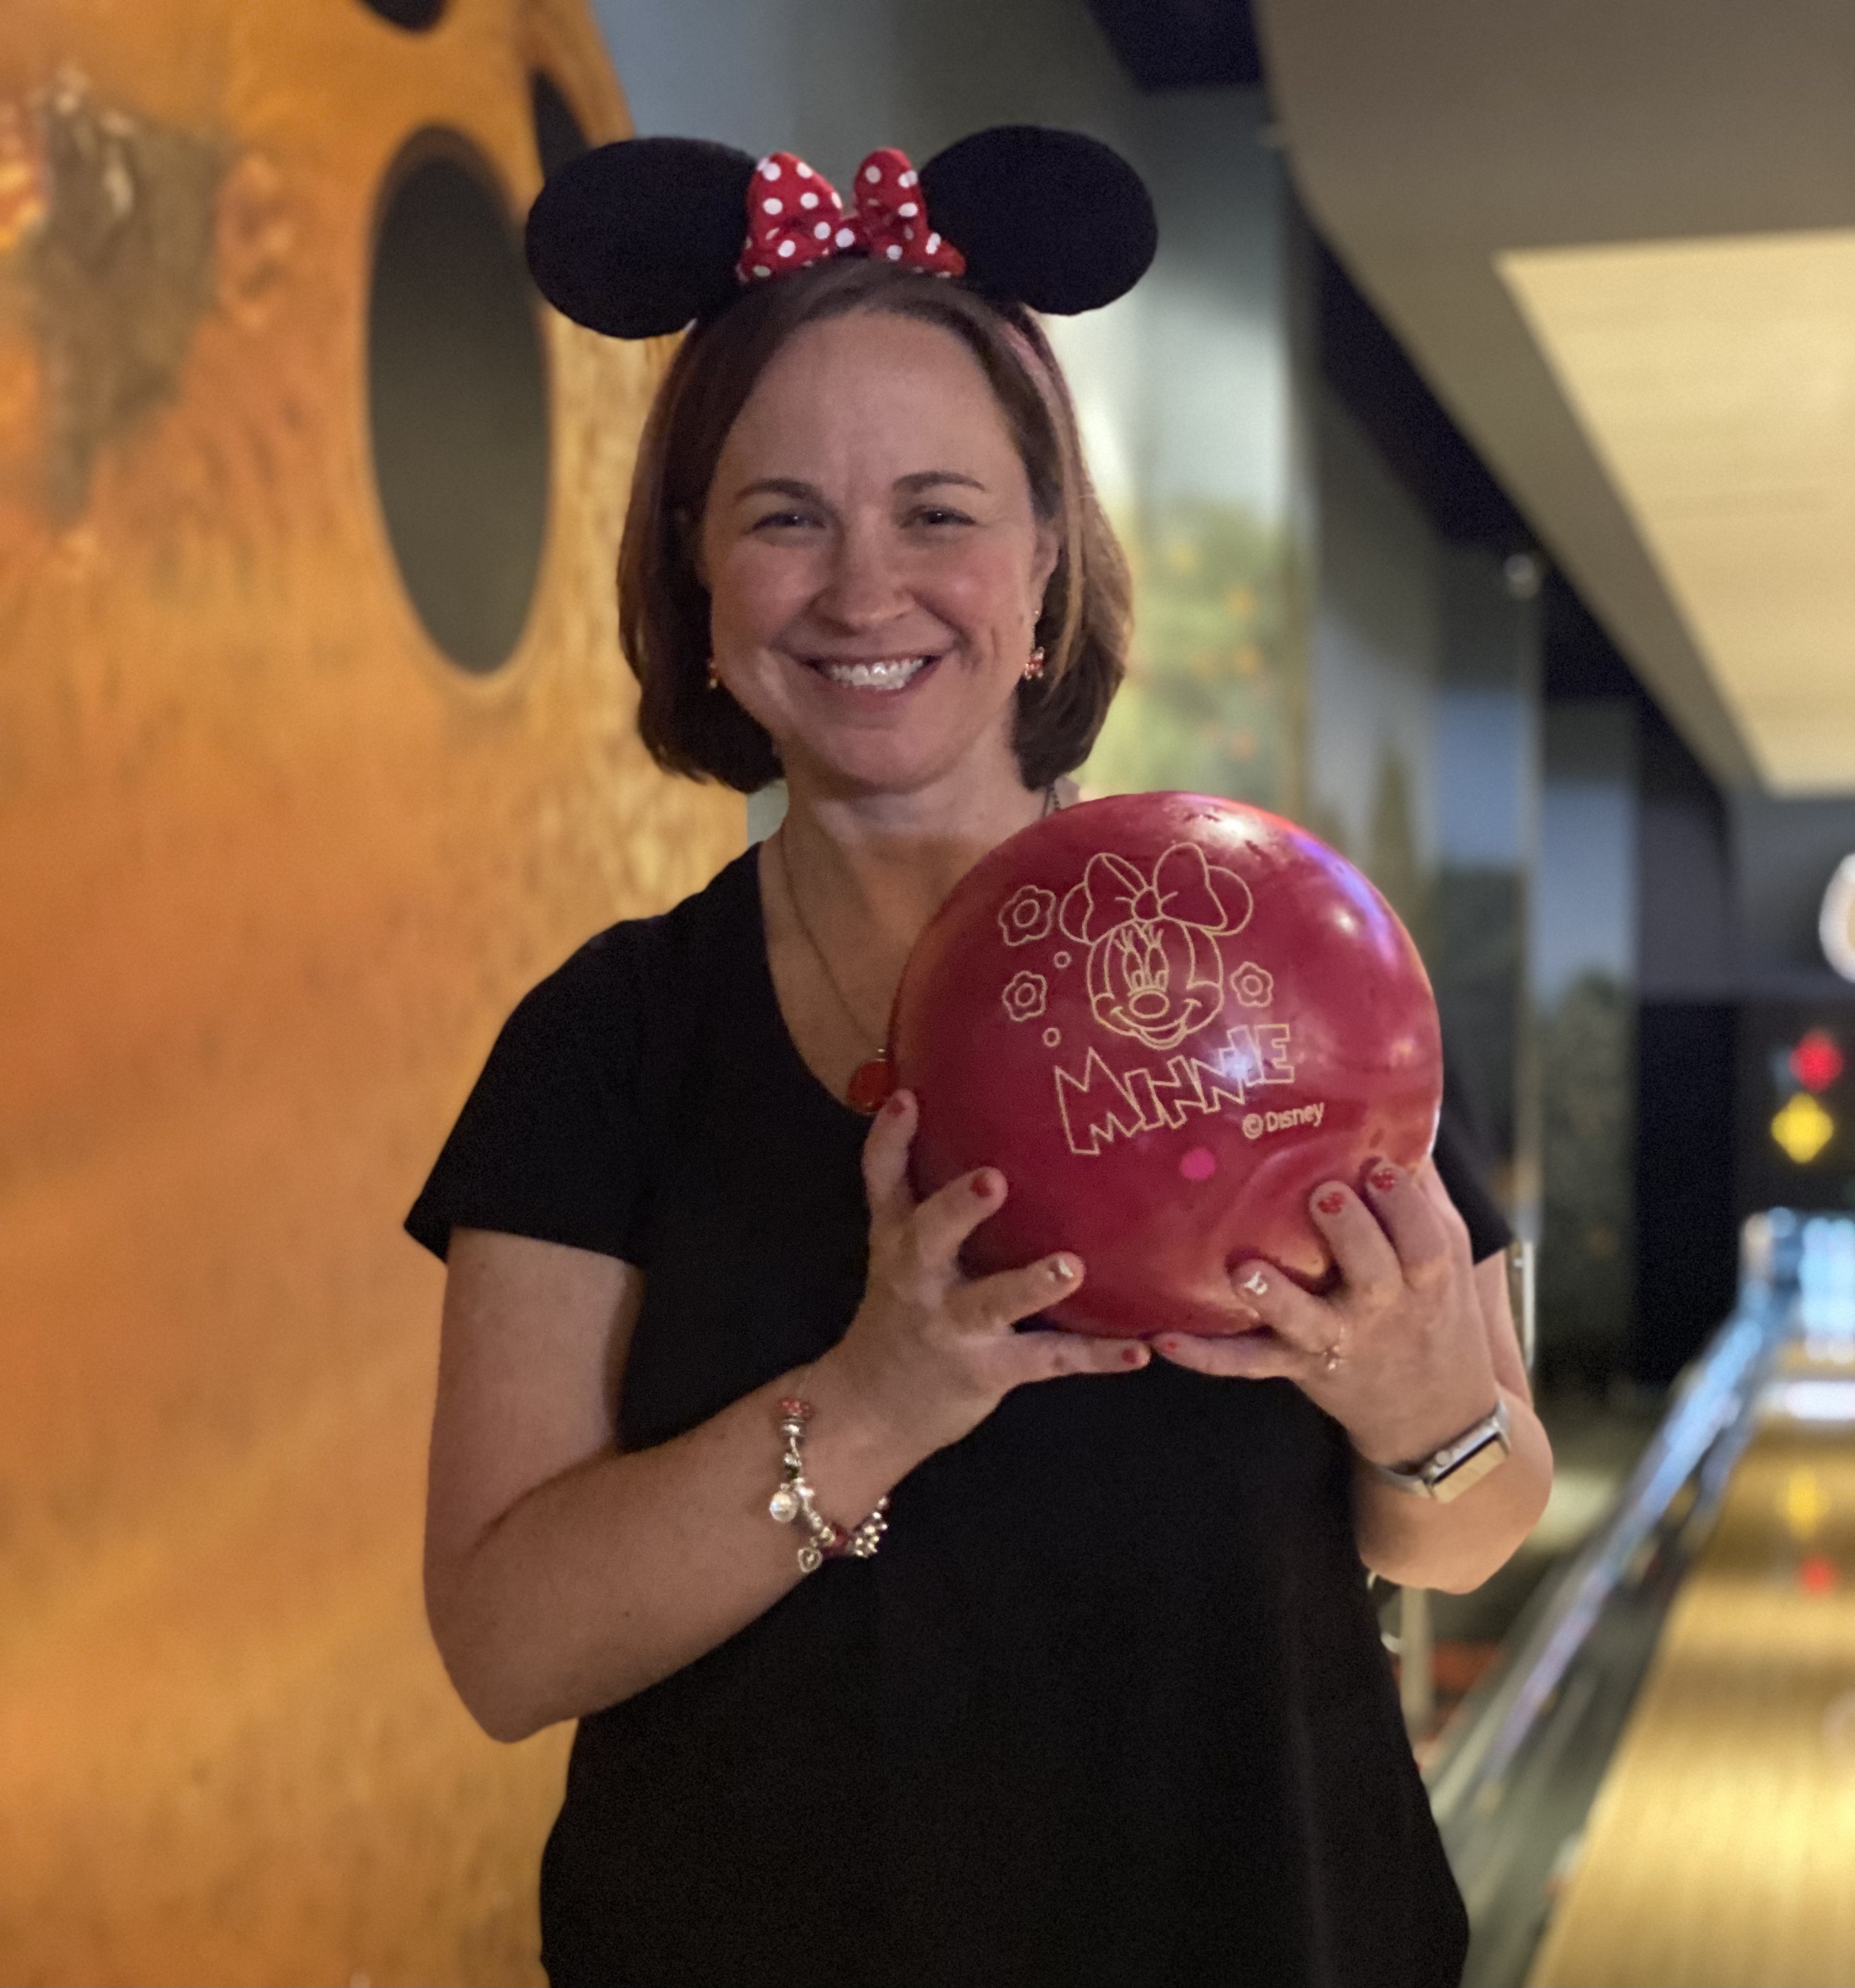 Splitsville bowling and Disney are more similar than you think